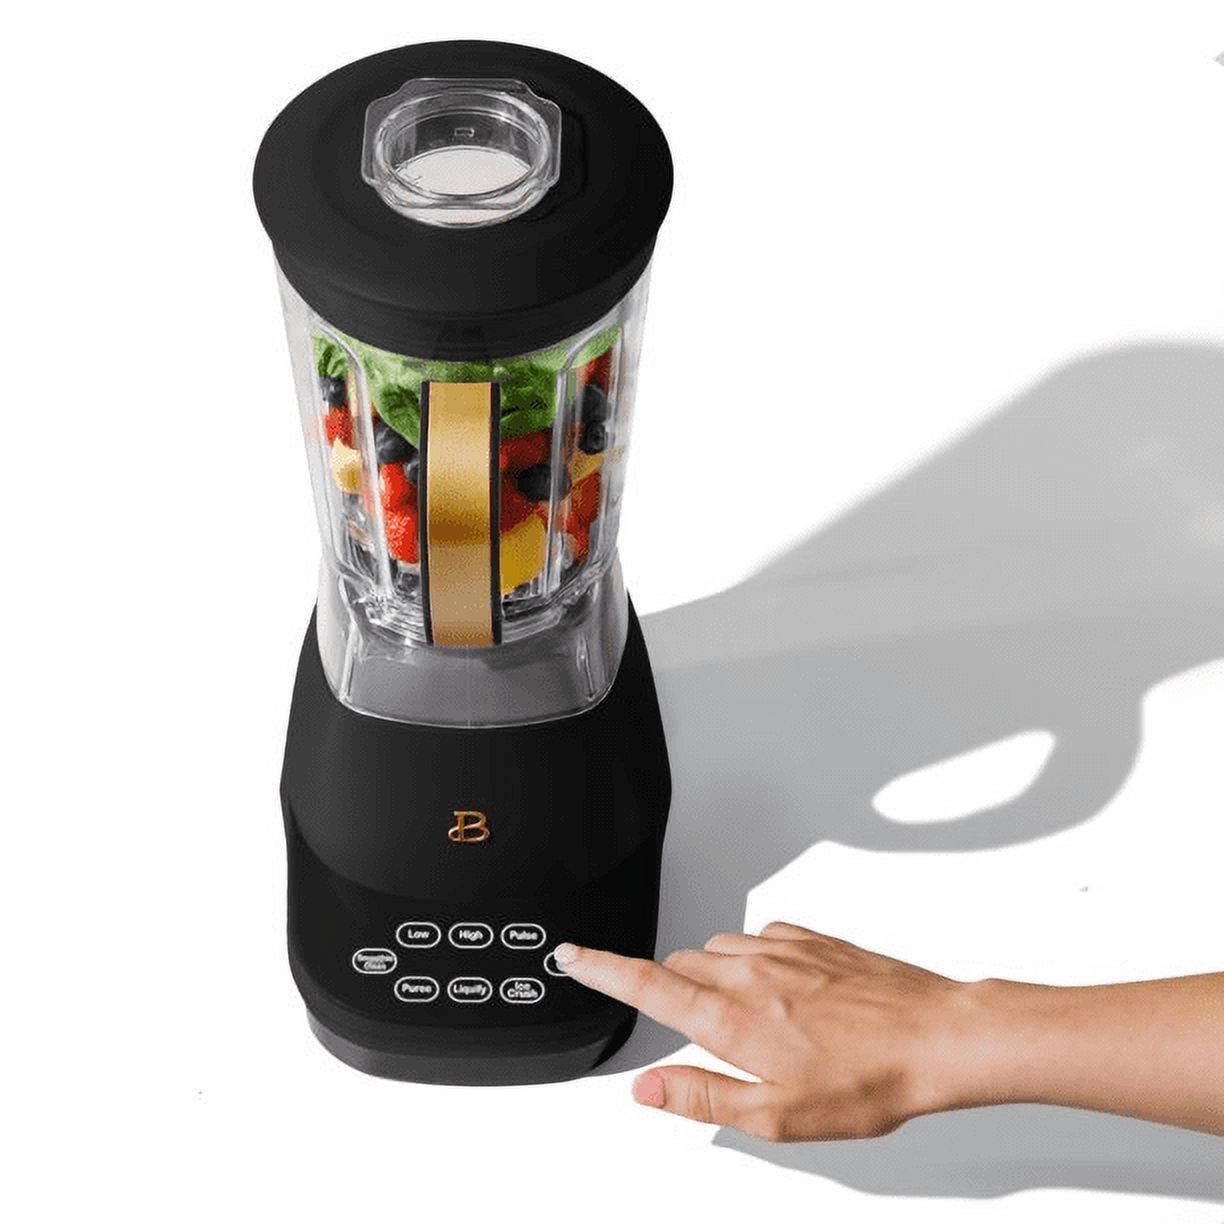 Beautiful High Performance Touchscreen Blender, Black Sesame by Drew Barrymore - image 4 of 4